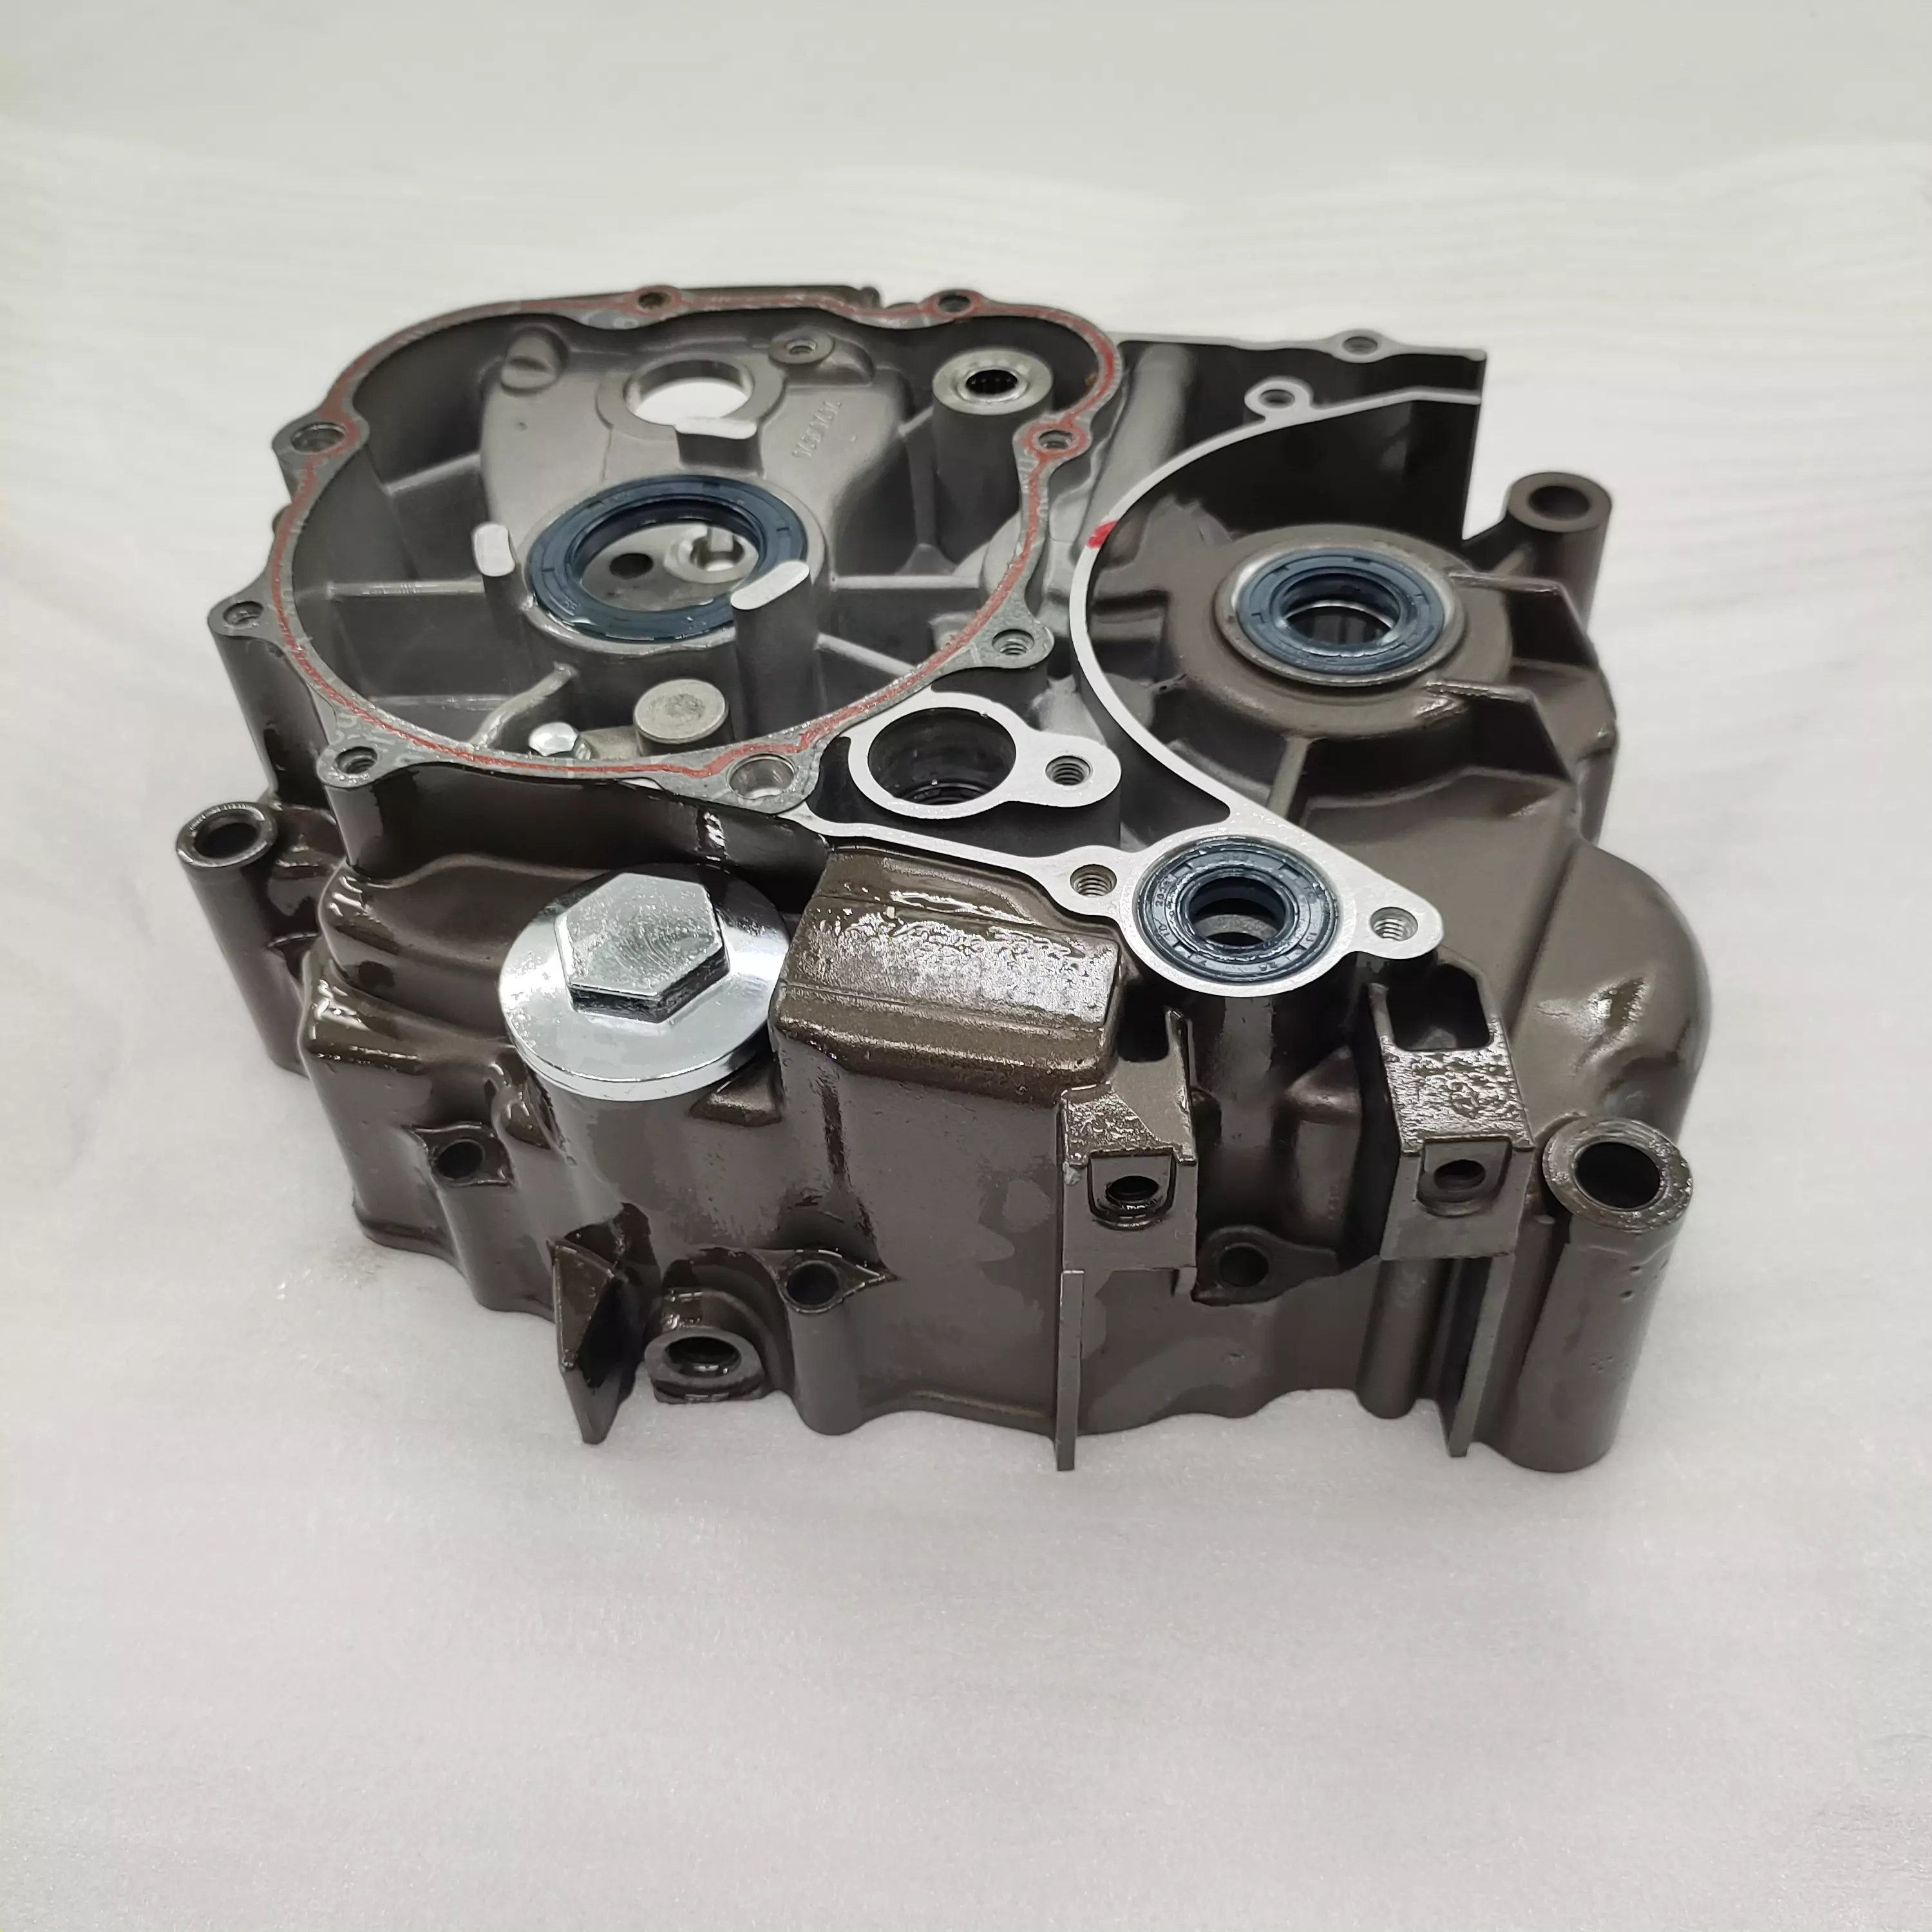 motorcycle LF150cc 250cc engine parts  Left crankcase high precison tricycle engine parts high quality factory direct sale